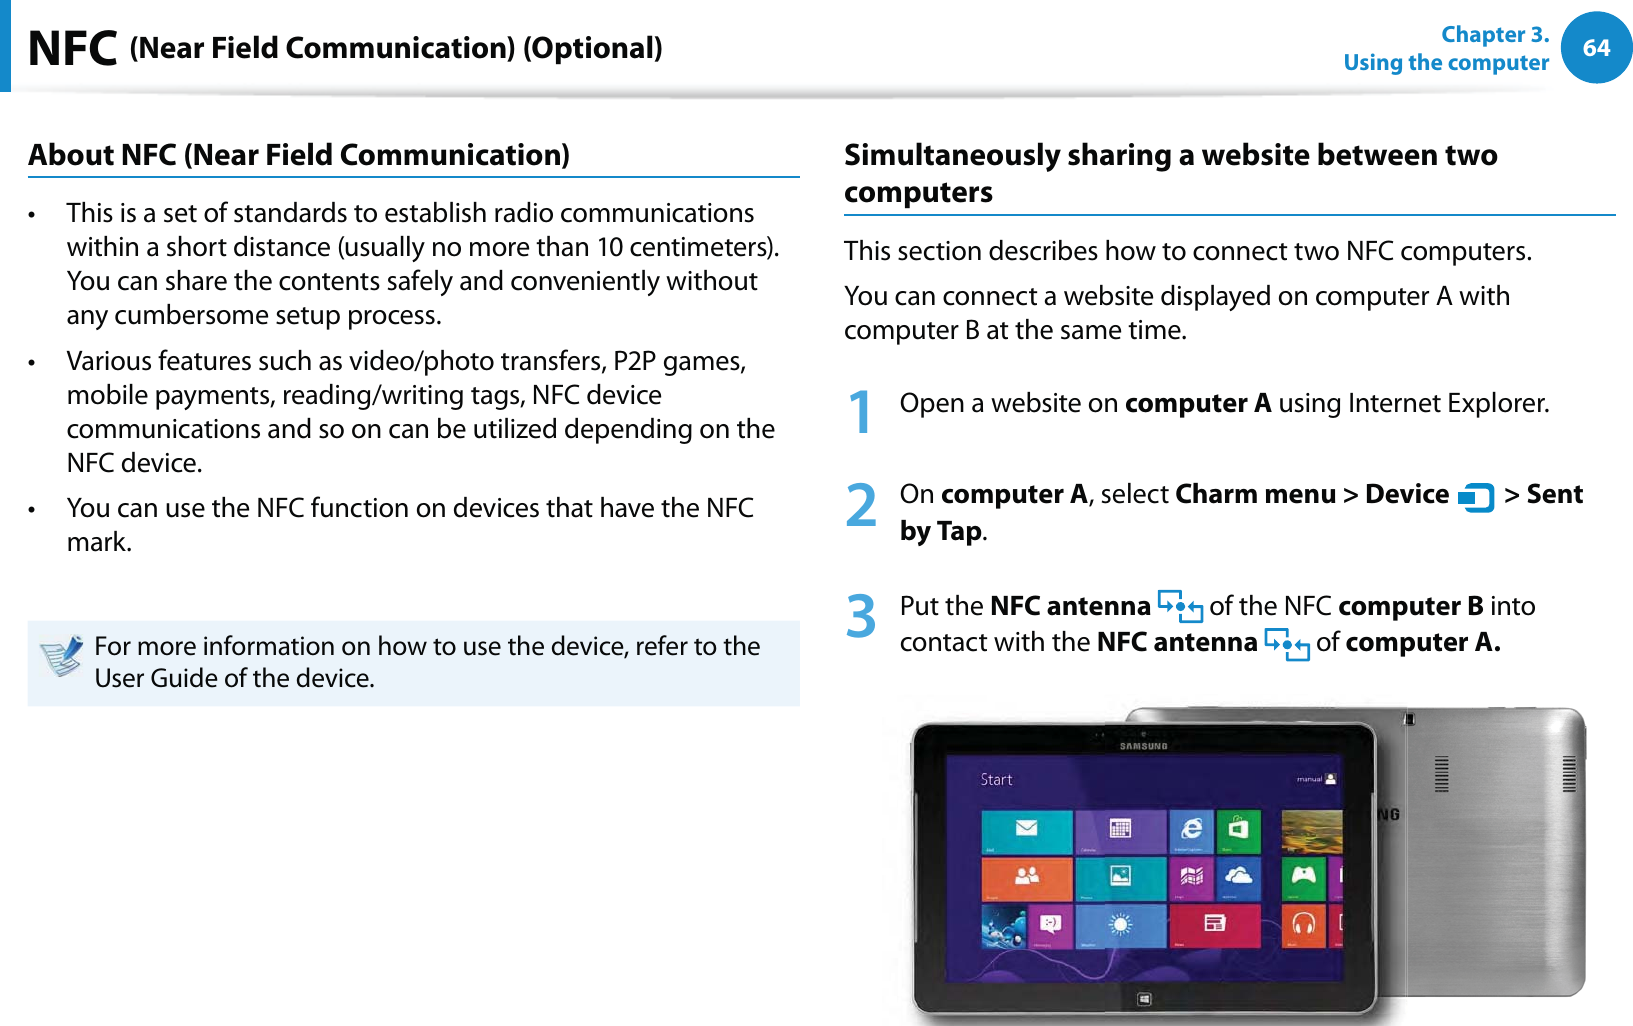 64Chapter 3.  Using the computerNFC (Near Field Communication) (Optional)About NFC (Near Field Communication)This is a set of standards to establish radio communications t within a short distance (usually no more than 10 centimeters).  You can share the contents safely and conveniently without any cumbersome setup process.Various features such as video/photo transfers, P2P games, t mobile payments, reading/writing tags, NFC device communications and so on can be utilized depending on the NFC device. You can use the NFC function on devices that have the NFC t mark.For more information on how to use the device, refer to the User Guide of the device.Simultaneously sharing a website between two computersThis section describes how to connect two NFC computers.You can connect a website displayed on computer A with computer B at the same time.1  Open a website on computer A using Internet Explorer.2 On computer A, select Charm menu &gt; Device   &gt; Sent by Tap.3 Put the NFC antenna   of the NFC computer B into contact with the NFC antenna  of computer A.